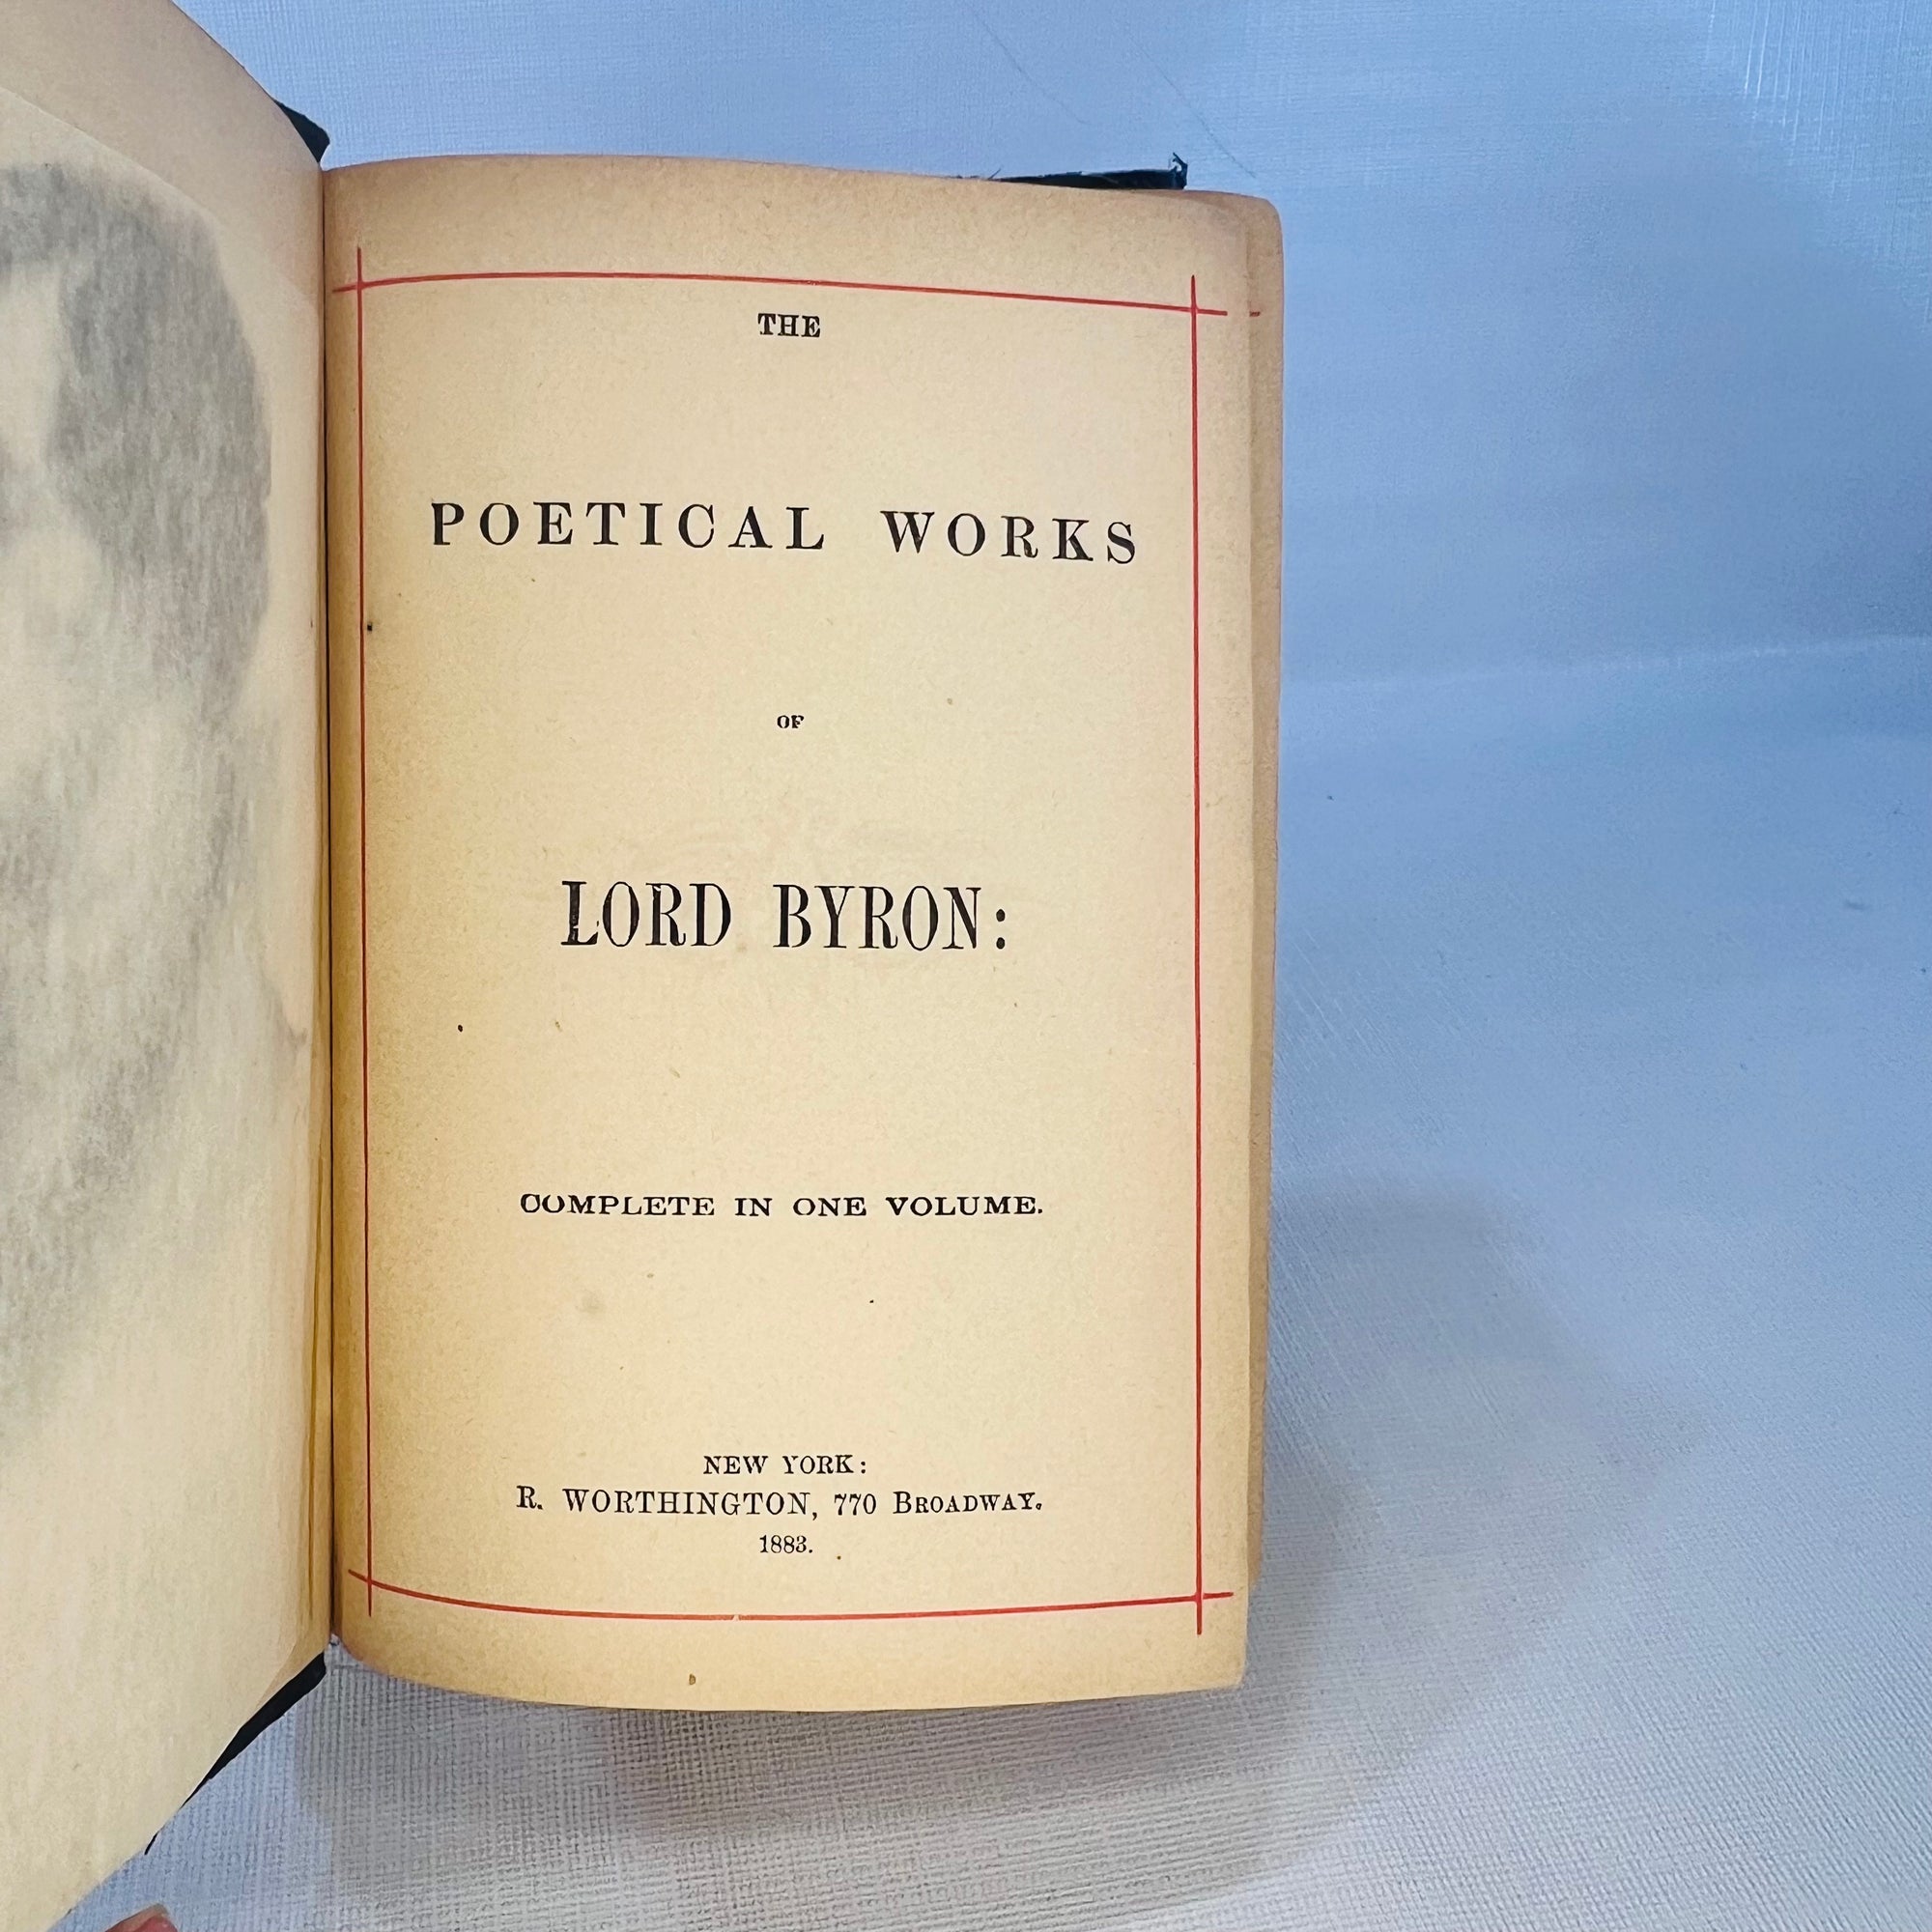 The Political Works of Lord Byron Complete in One Volume 1883 R. Worthington Publishers